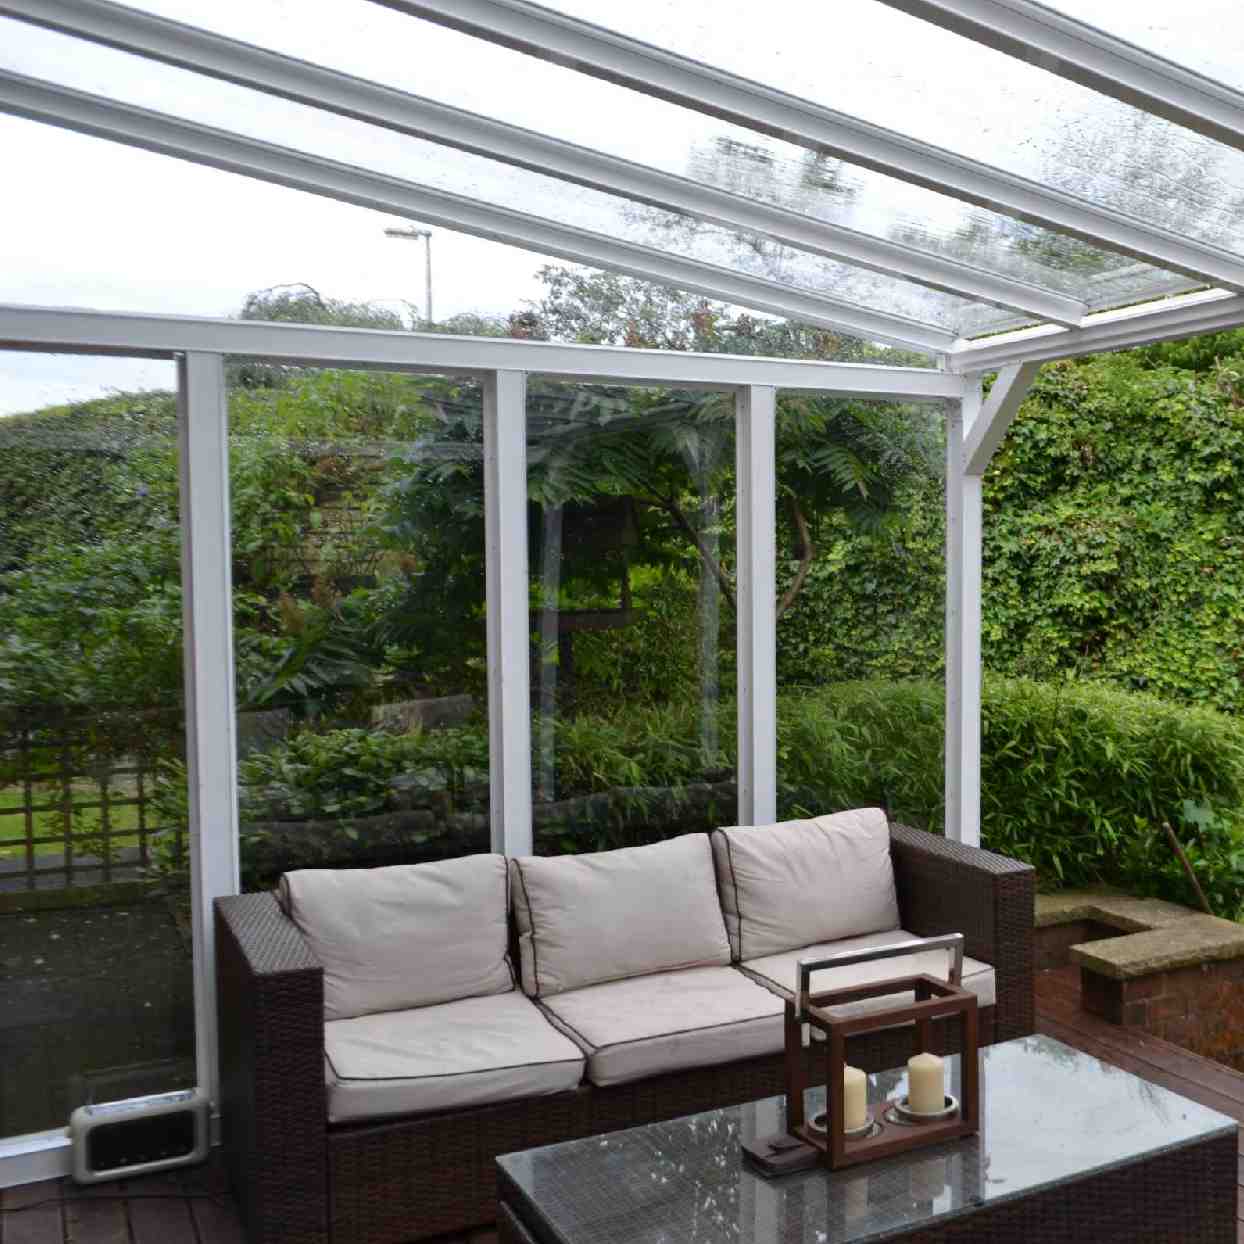 Buy Omega Verandah White with 16mm Polycarbonate Glazing - 3.5m (W) x 3.5m (P), (3) Supporting Posts online today